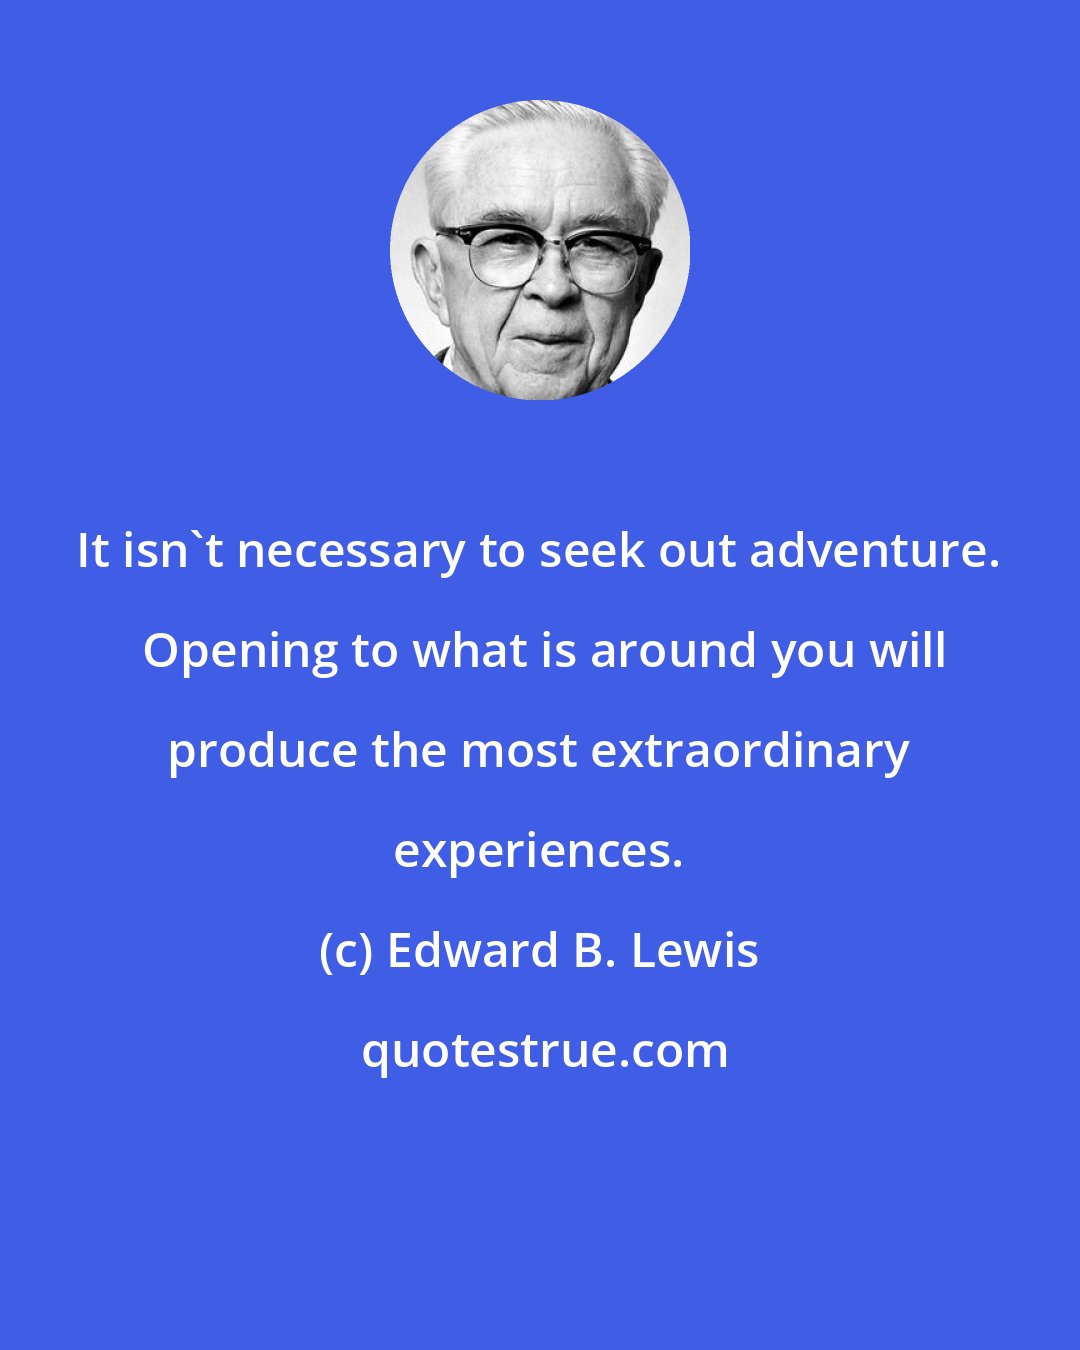 Edward B. Lewis: It isn't necessary to seek out adventure.  Opening to what is around you will produce the most extraordinary experiences.